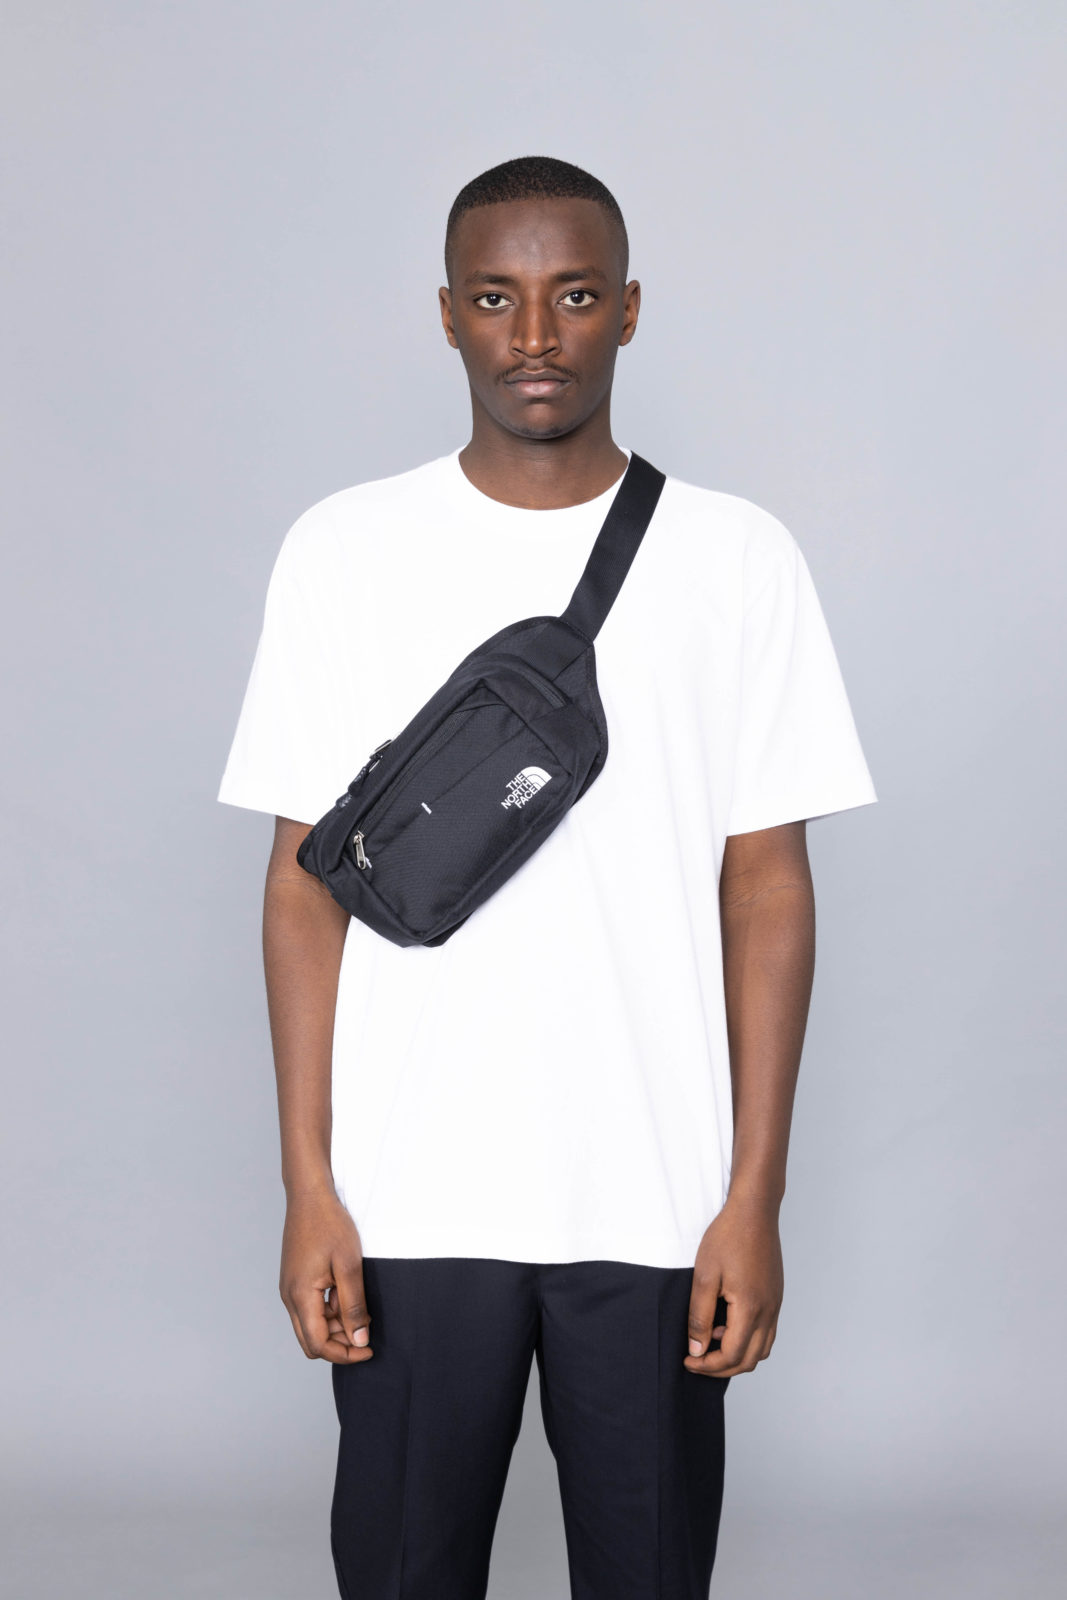 the north face bozer hip pack 2